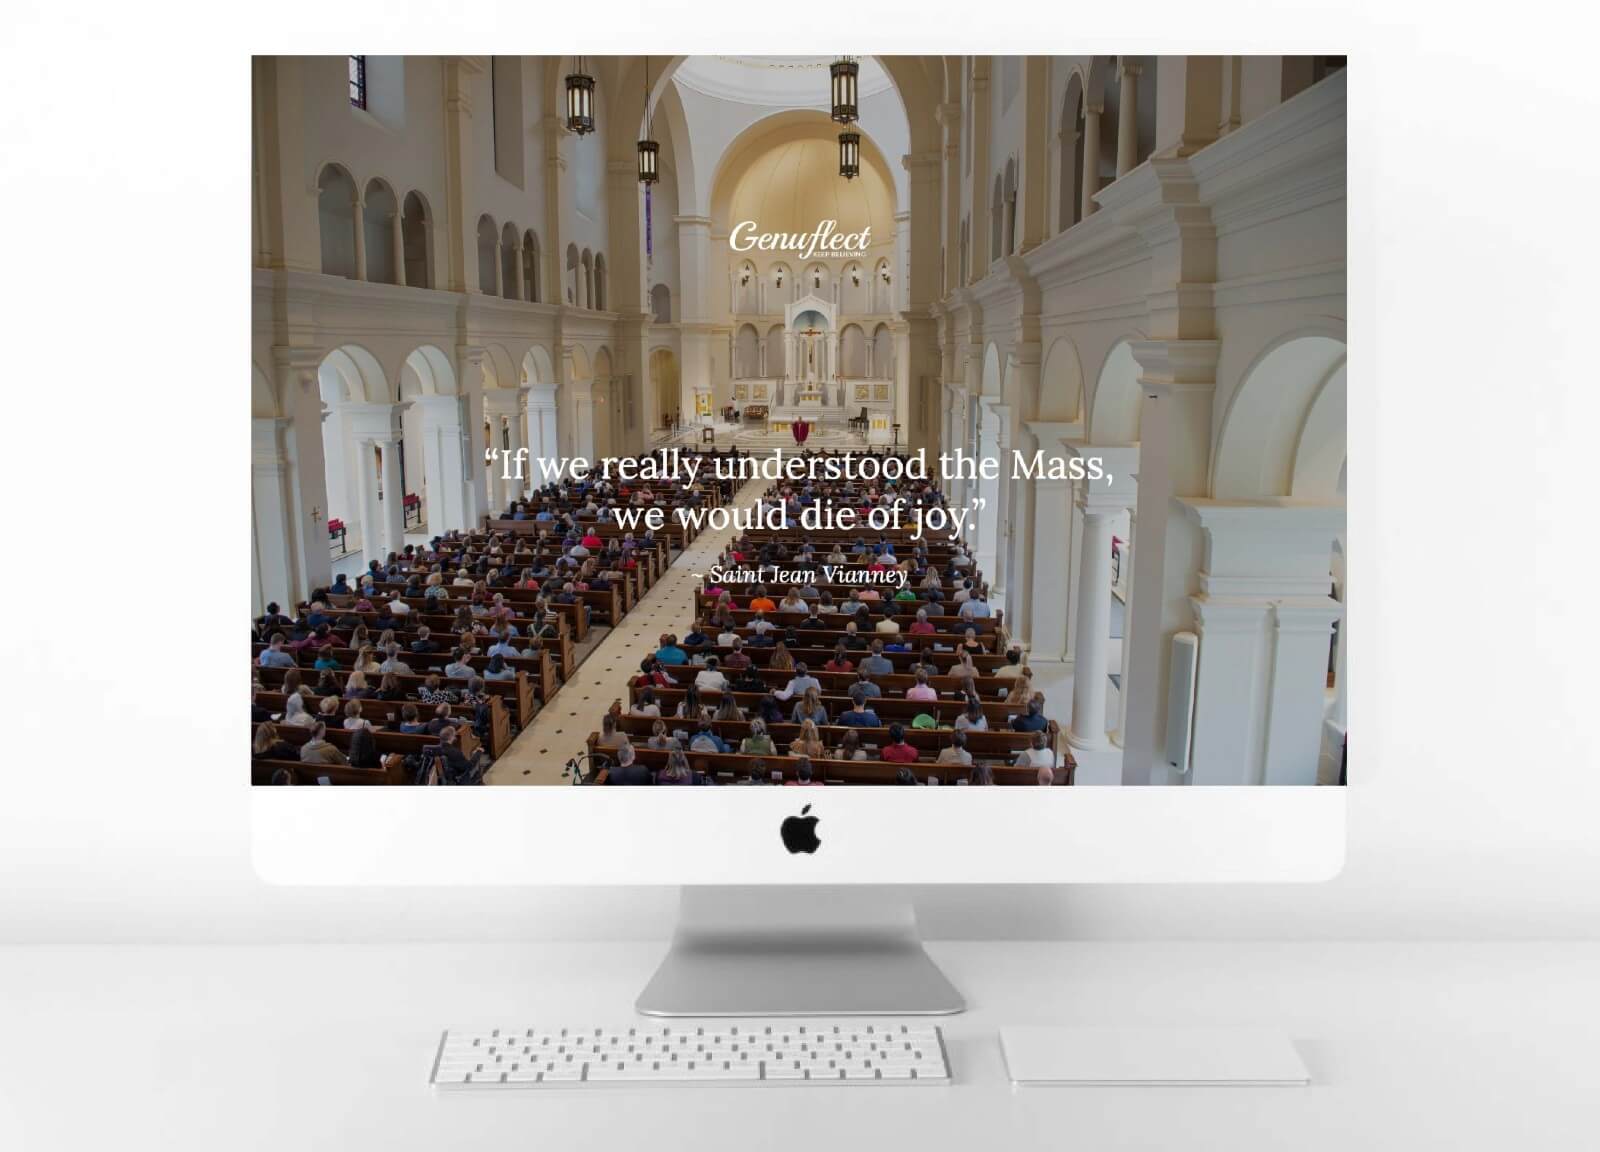 Genuflect computer background image of a Catholic Mass in a Cathedral